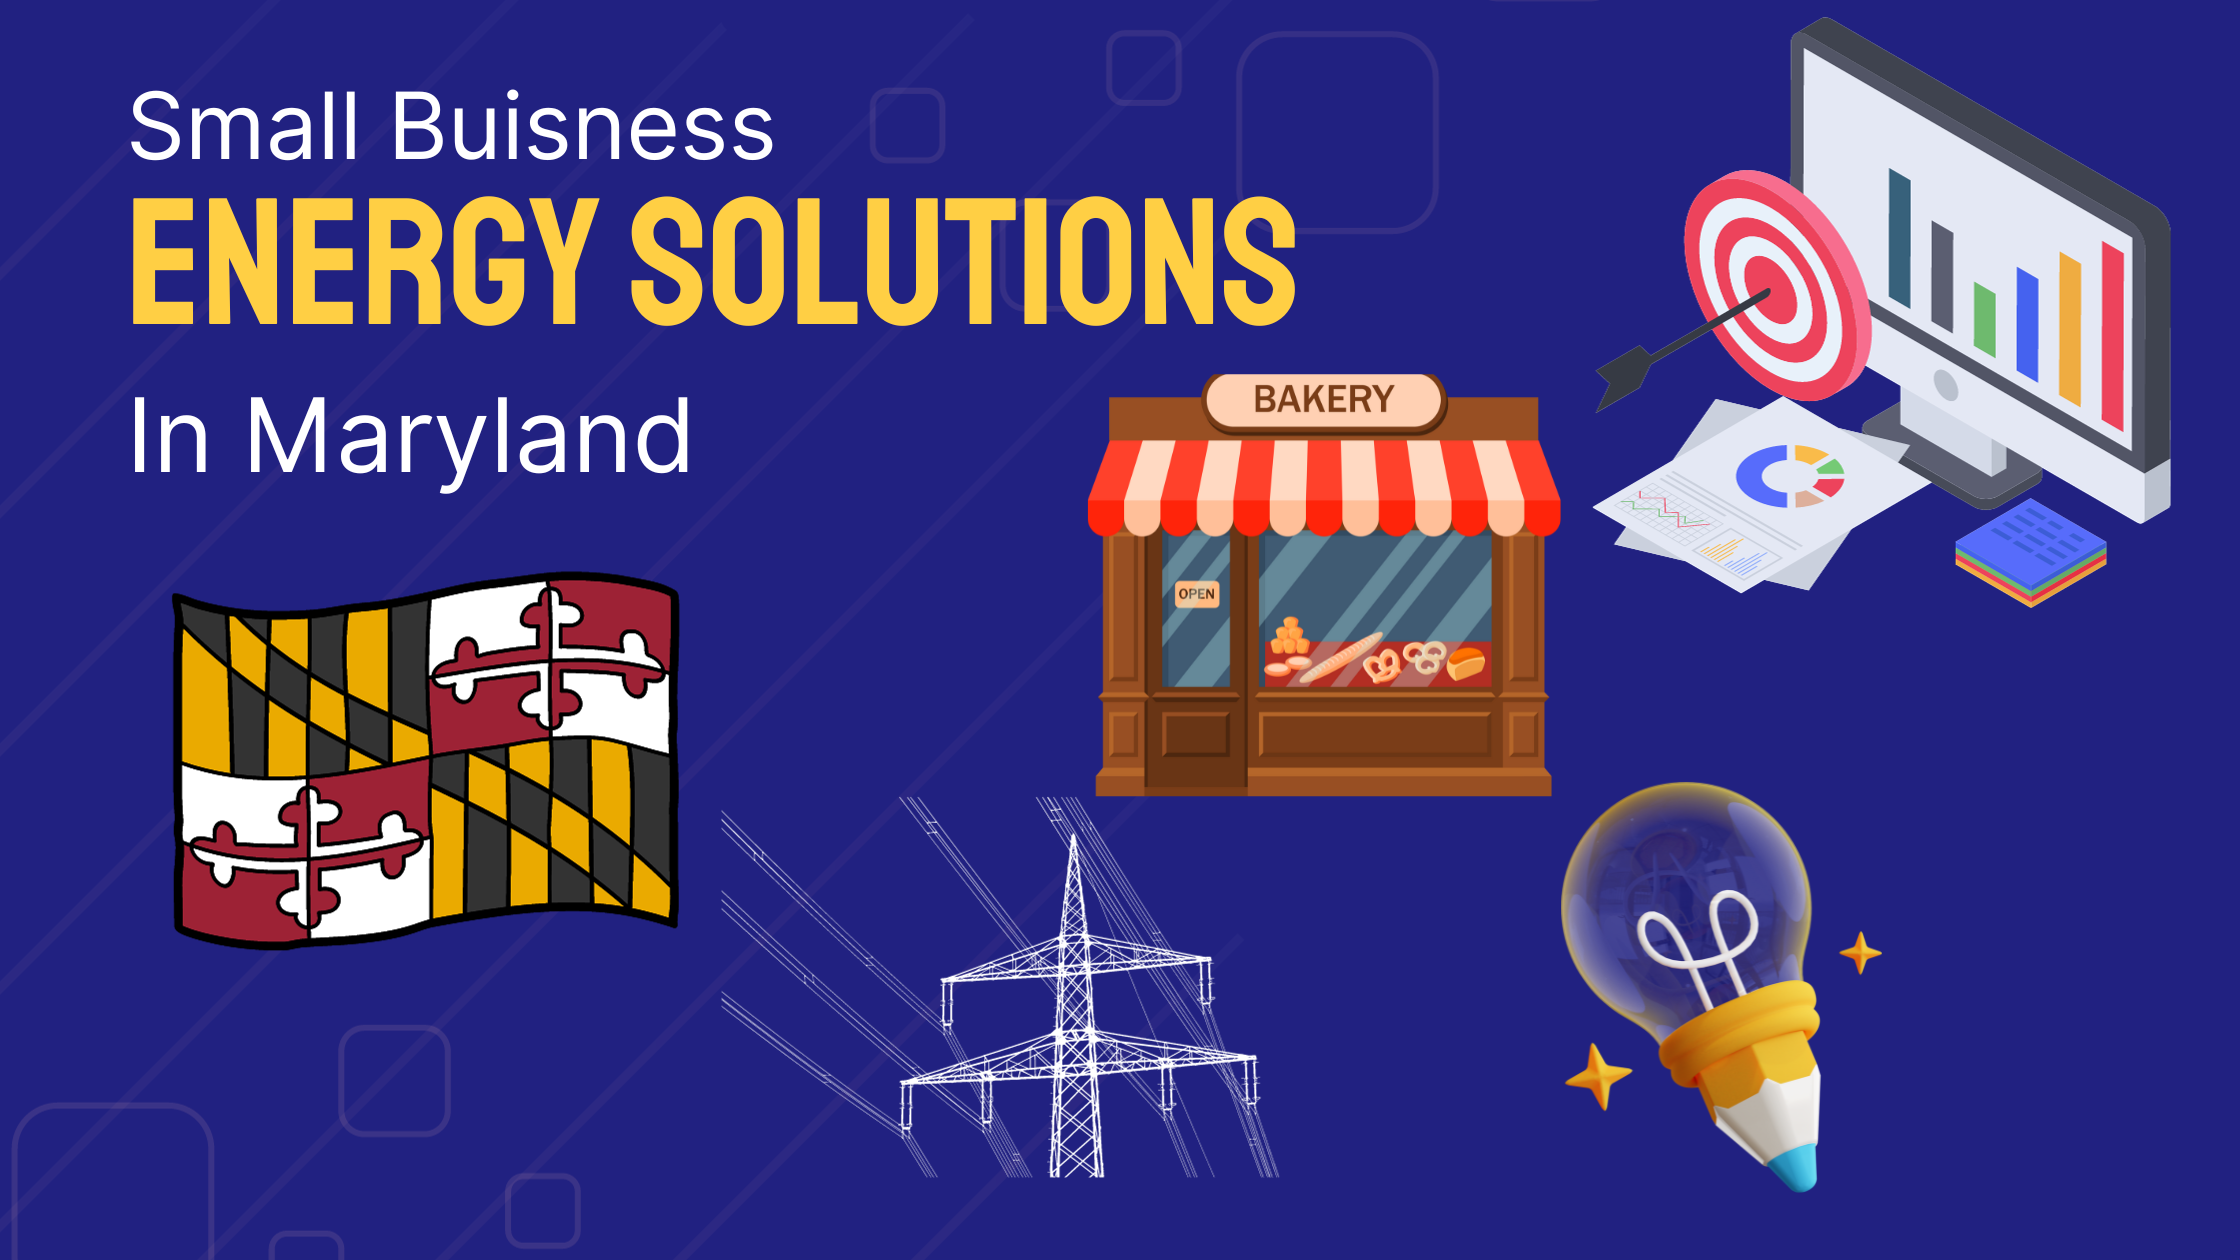 Maryland small businesses save money by taking advantage of electricity choice